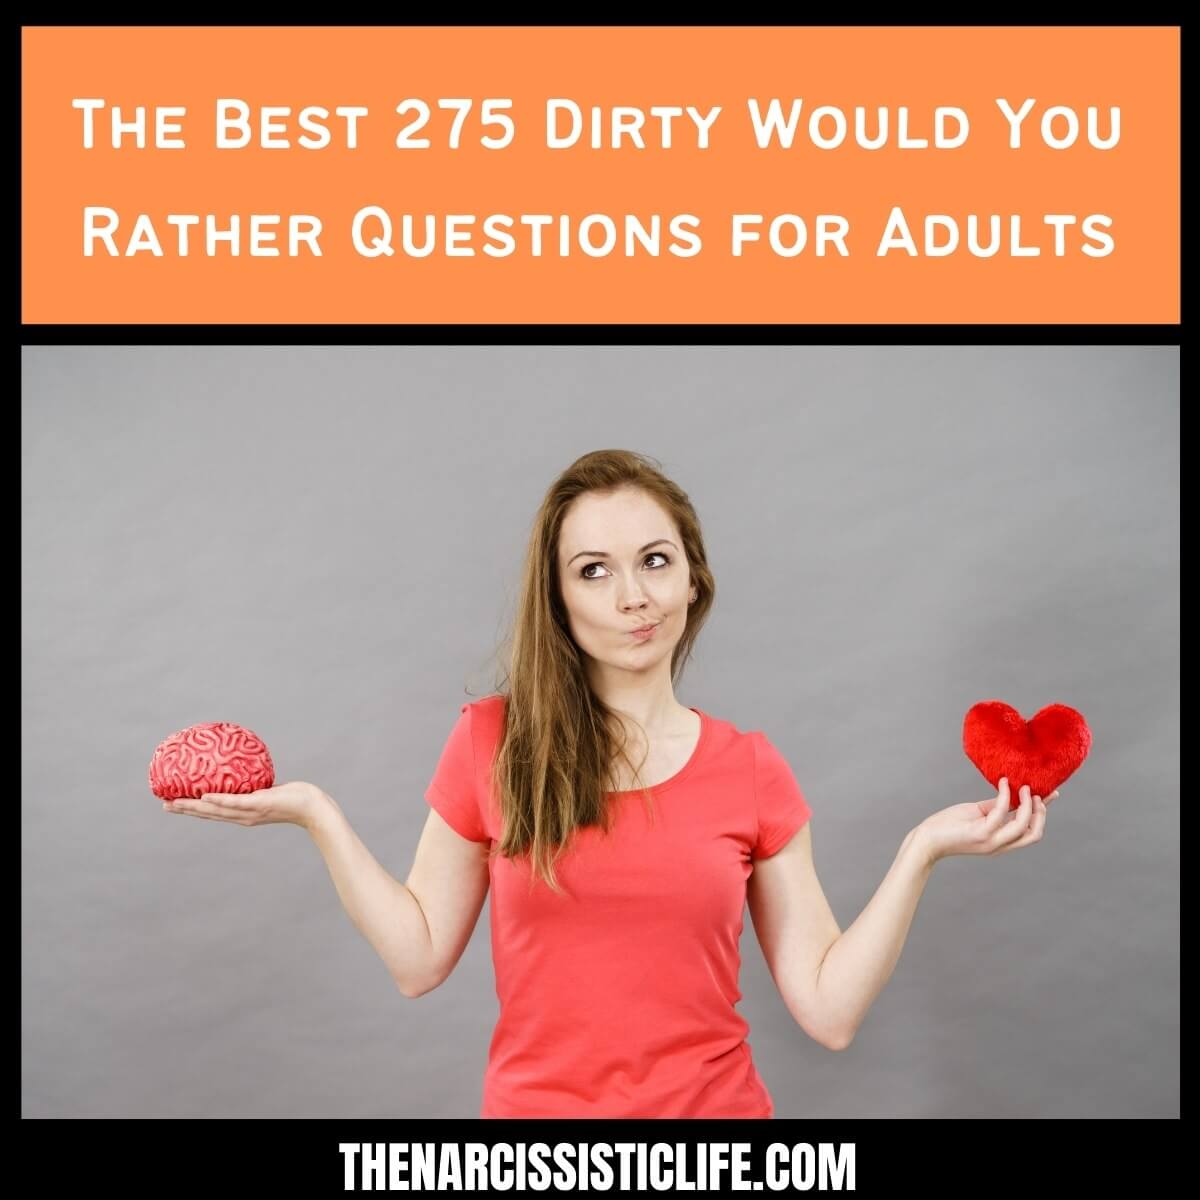 The Best 275 Dirty Would You Rather Questions for Adults